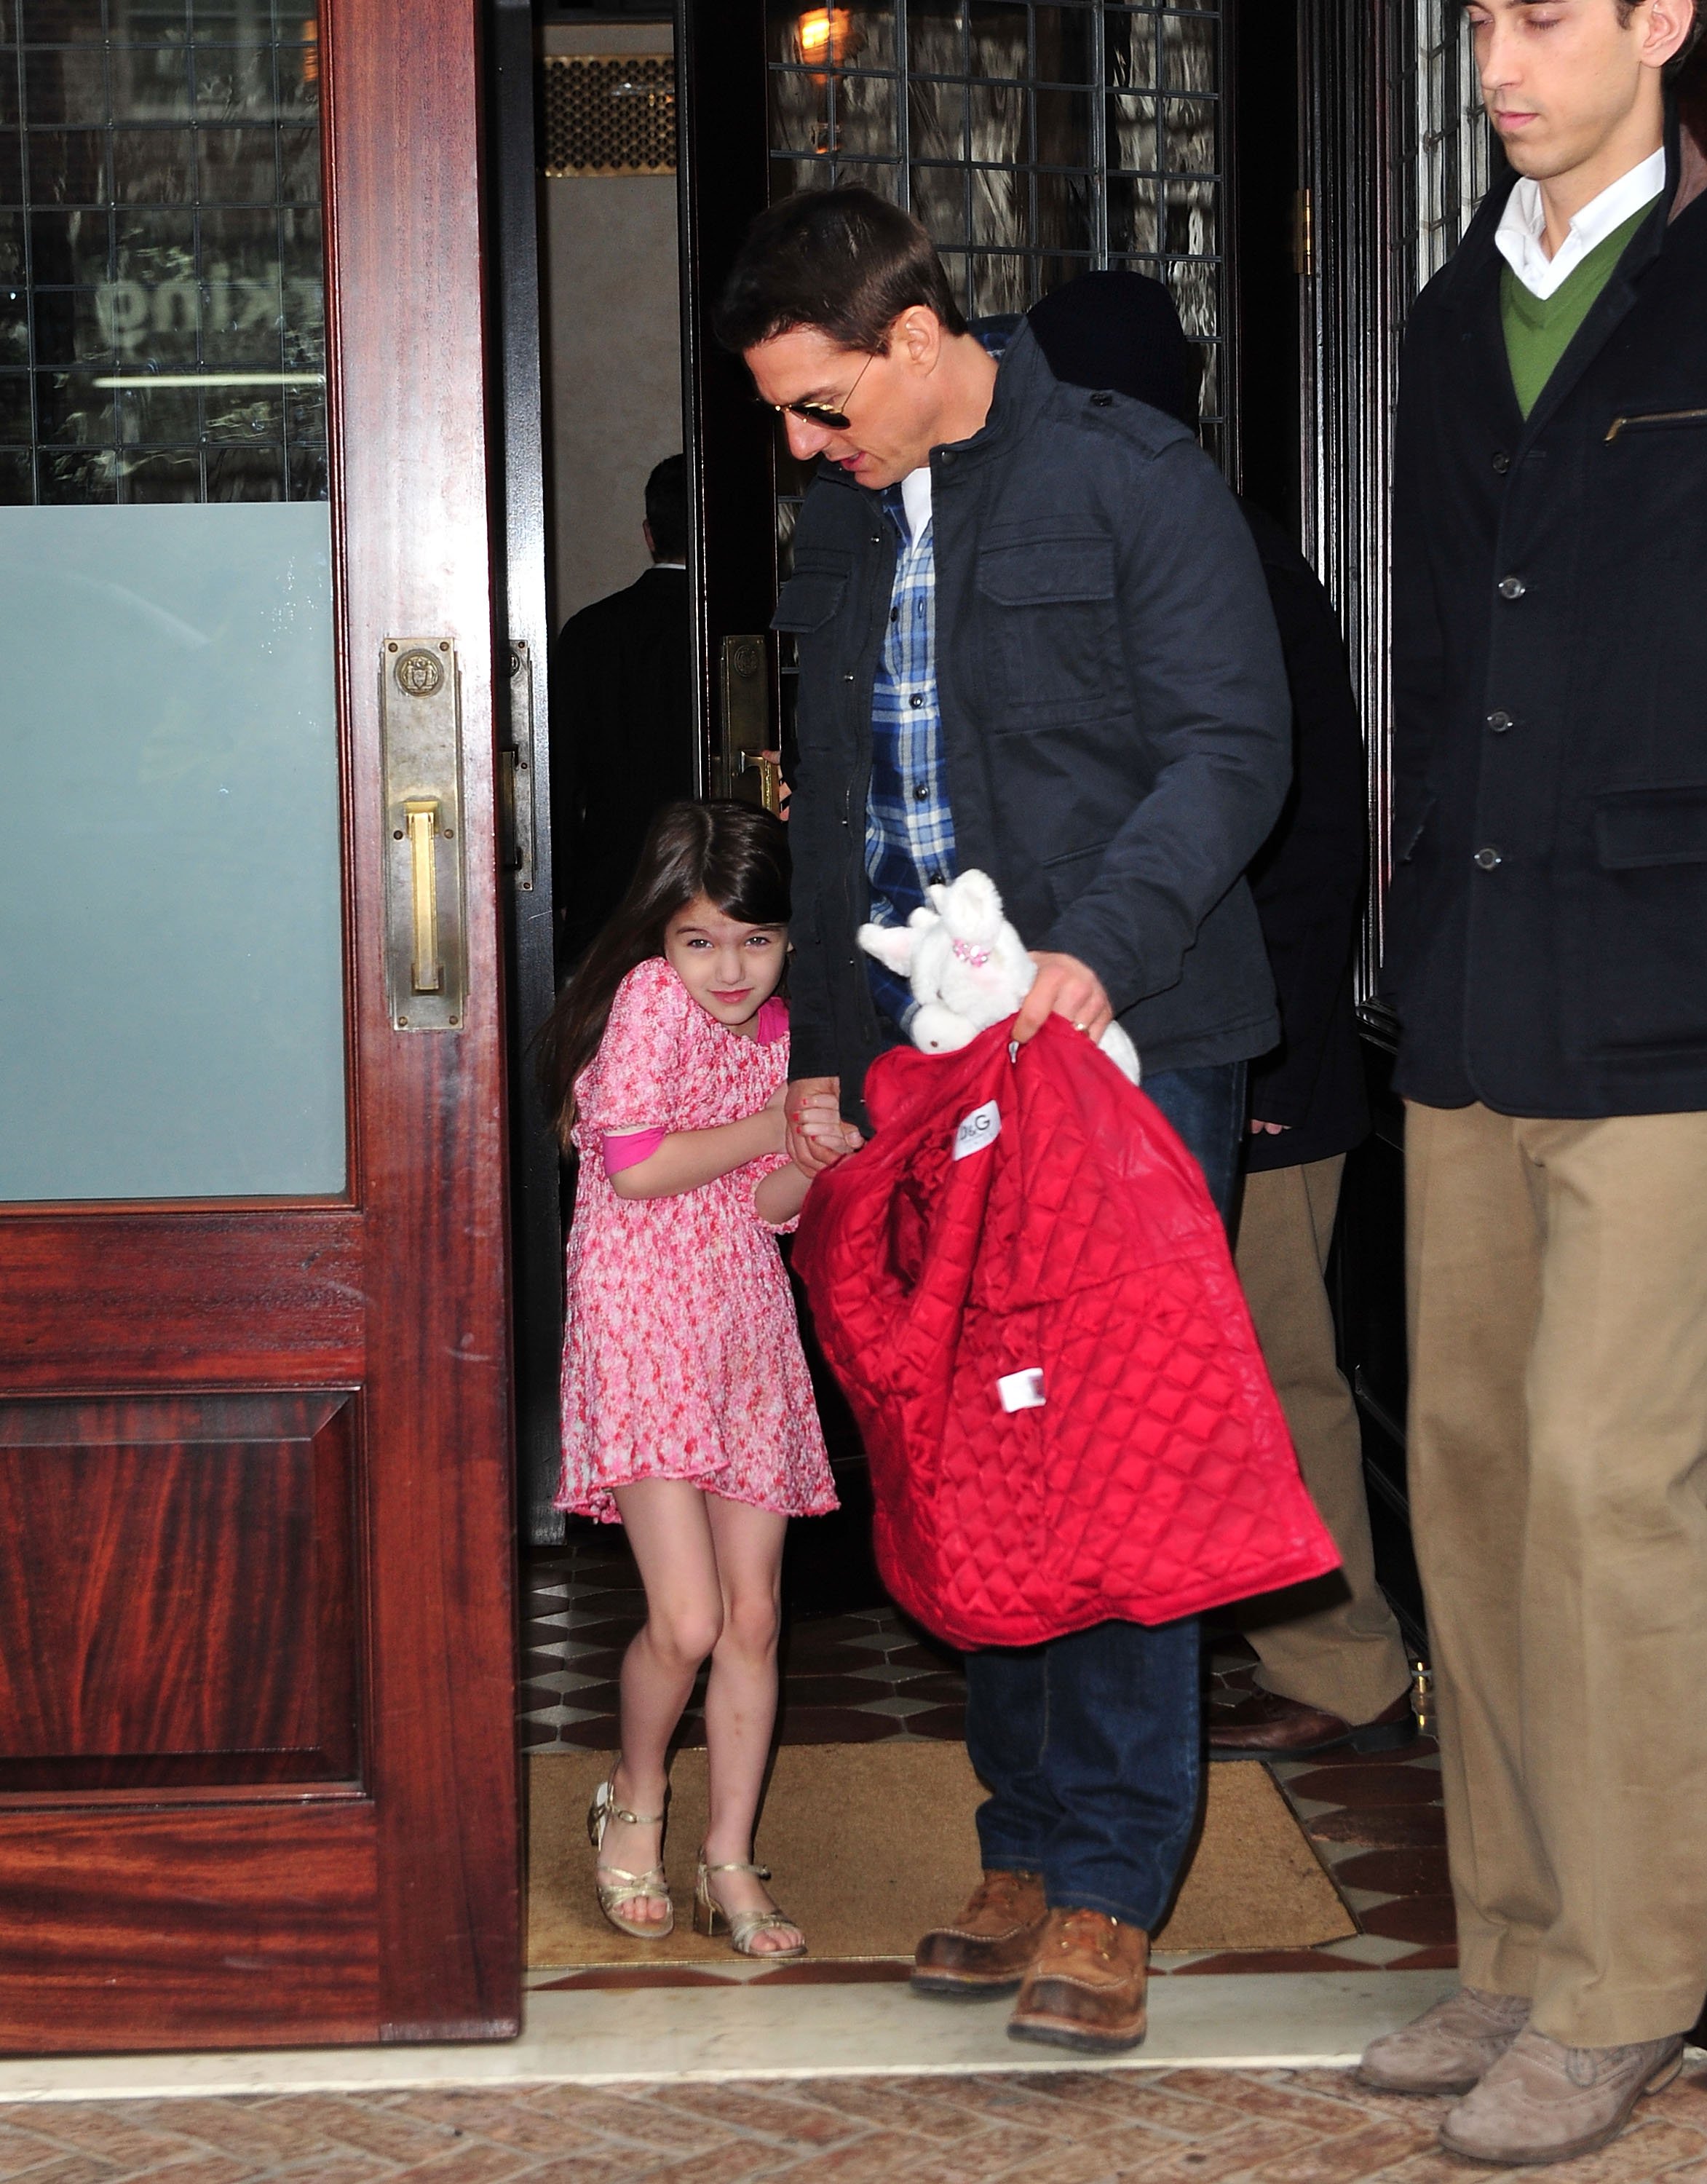 Tom Cruise and Suri Cruise on the streets of Manhattan on December 16, 2011 in New York City.  |  Source: Getty Images